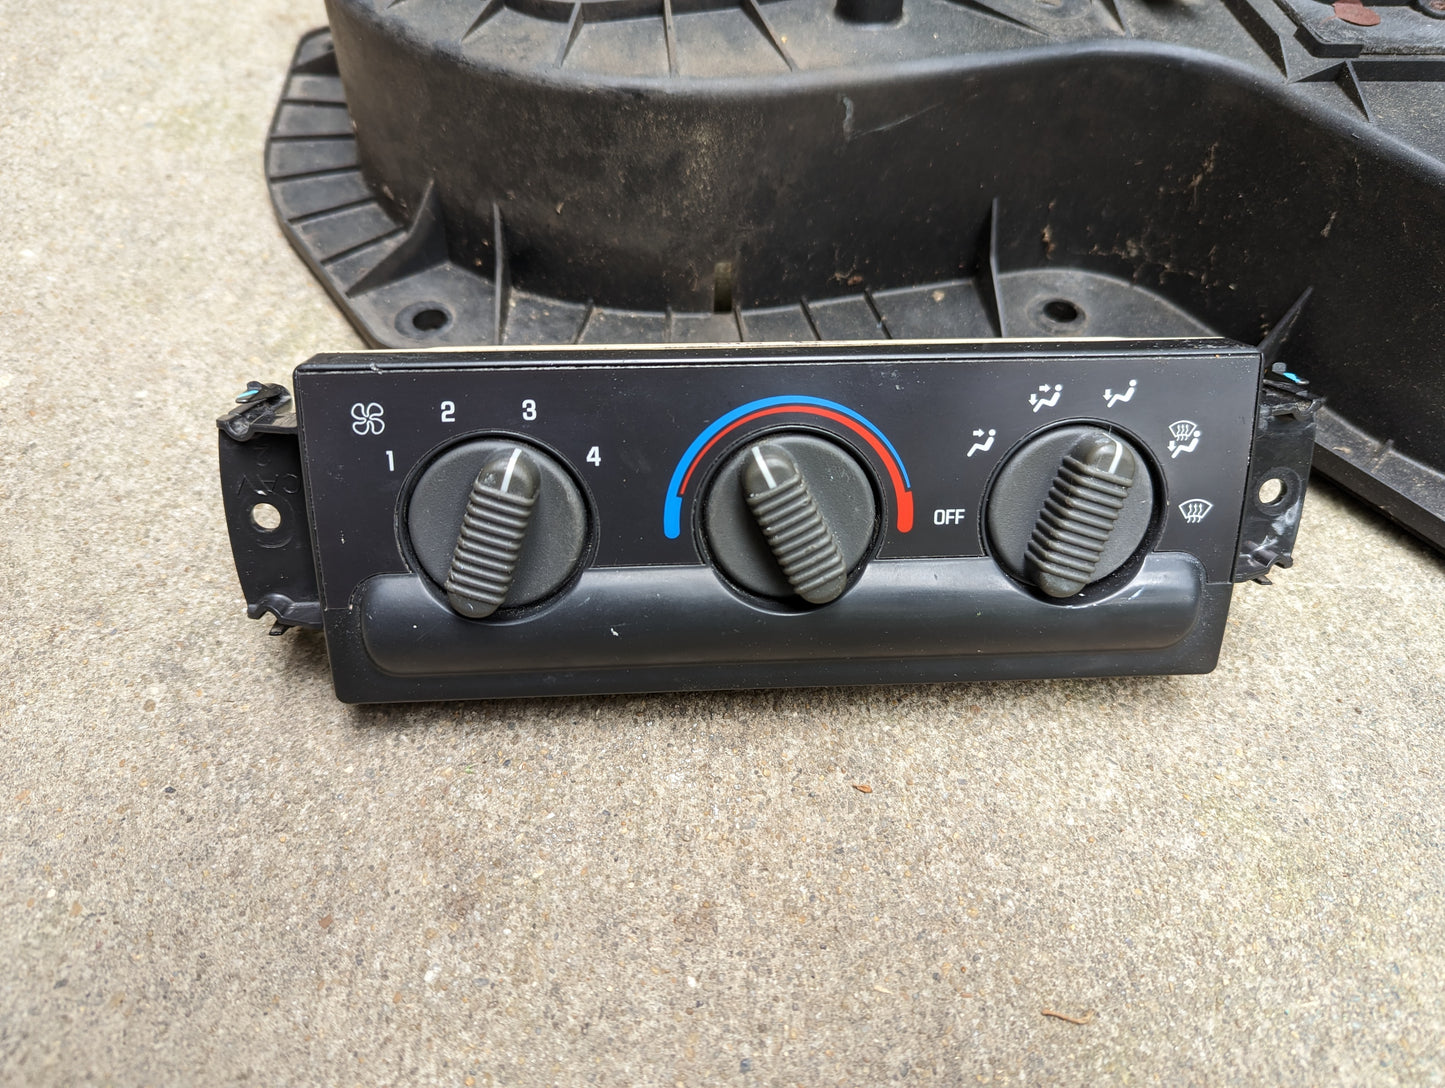 OEM HD Heater A/C Delete with Control Panel for 1998-2005 Chevy S10, Blazer, and more